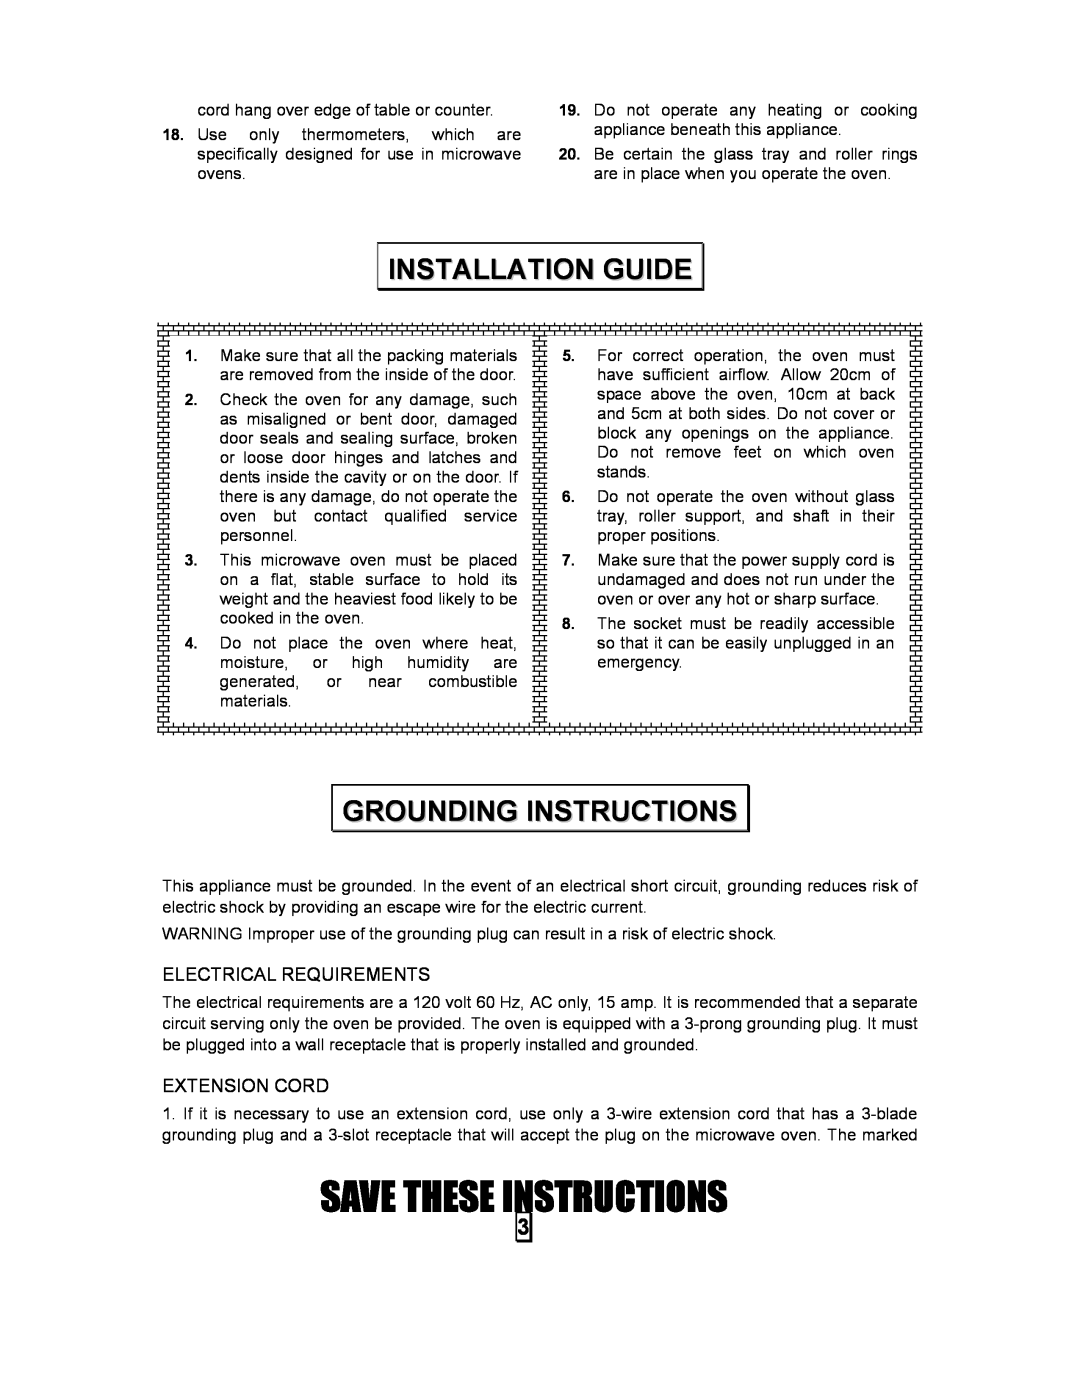 Galaxy Metal Gear 87040 user manual Installation Guide, Grounding Instructions, Electrical Requirements, Extension Cord 